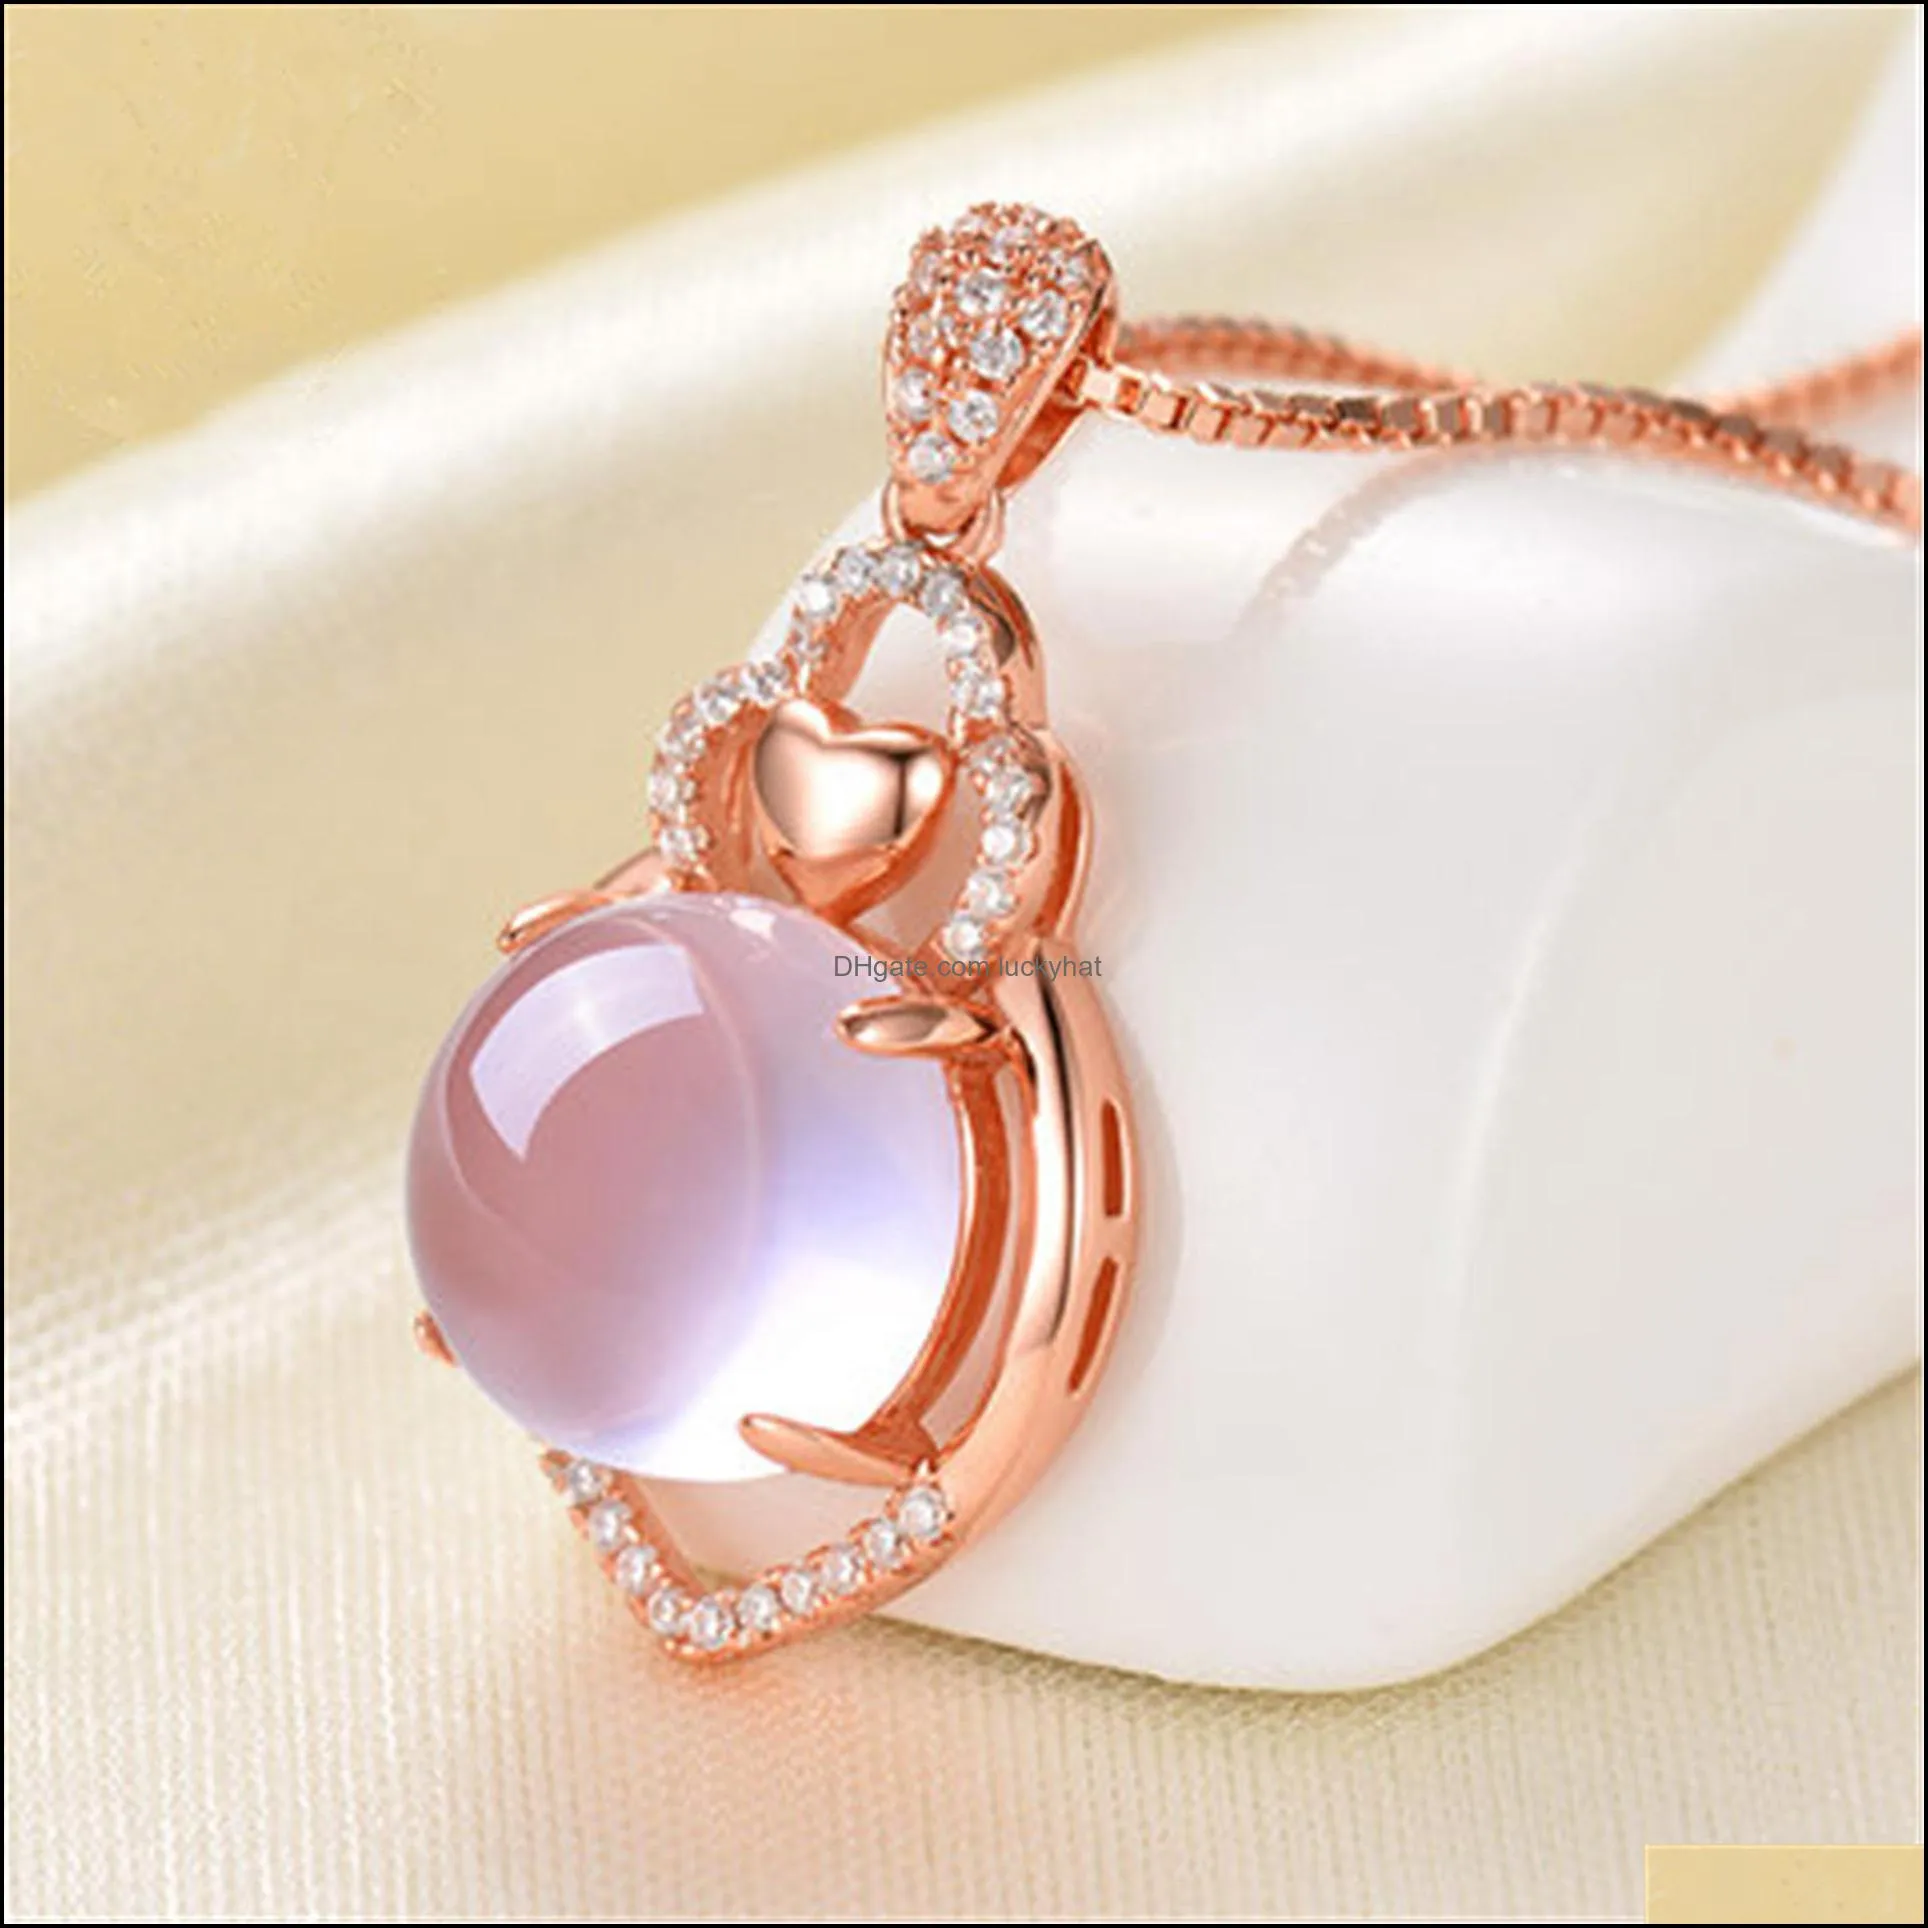 pink opal chokers necklaces ross quartz necklace for wedding women sweet jewelry girls gift rose gold necklace luckyhat